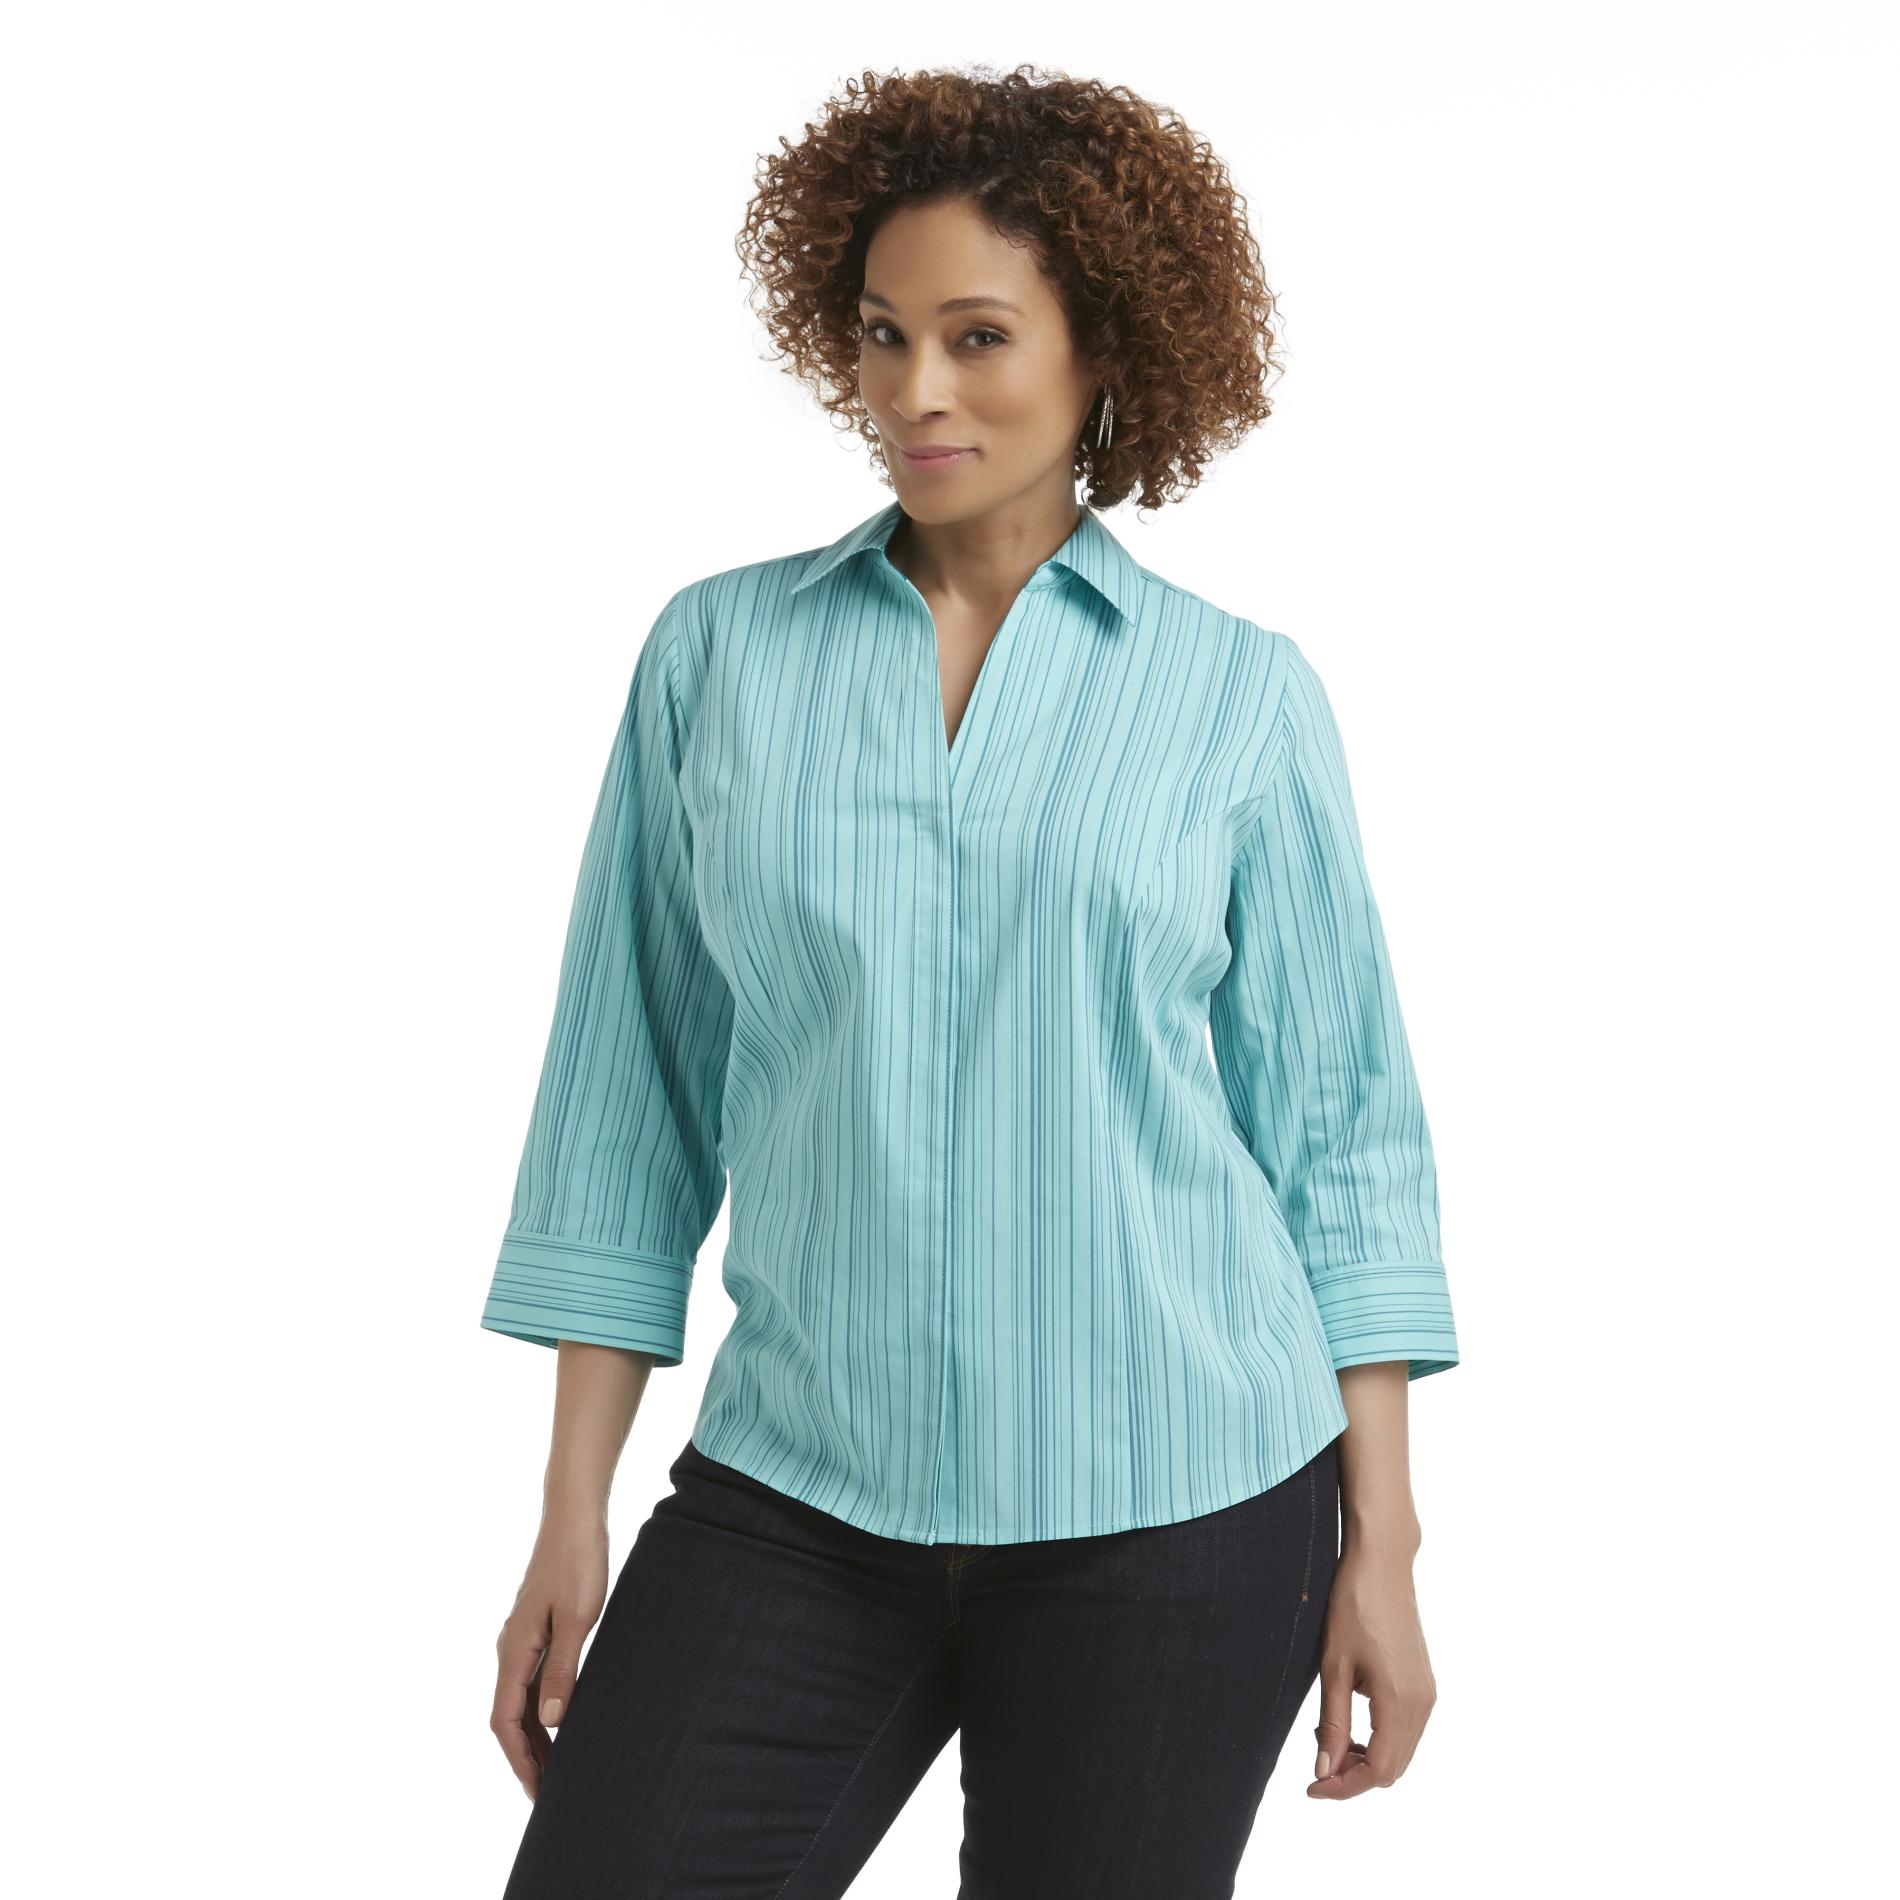 Basic Editions Women's Plus Stretch Blouse - Striped